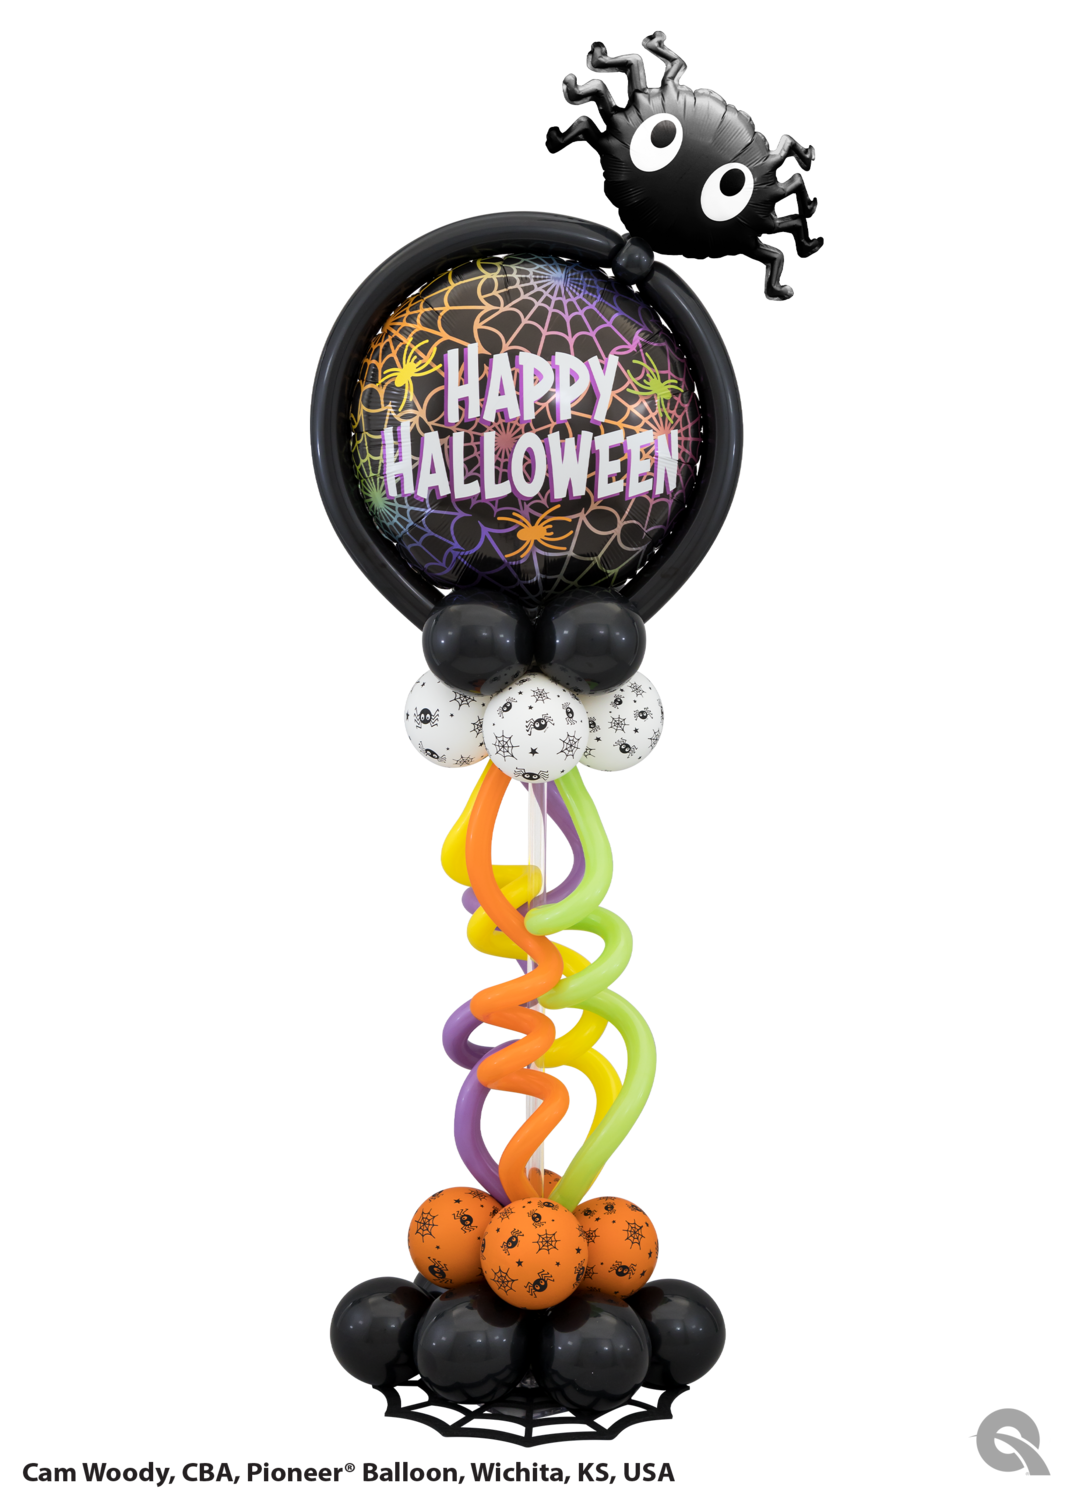 Dark topper Halloween Balloon Centerpiece for Table, air filled (indoors)